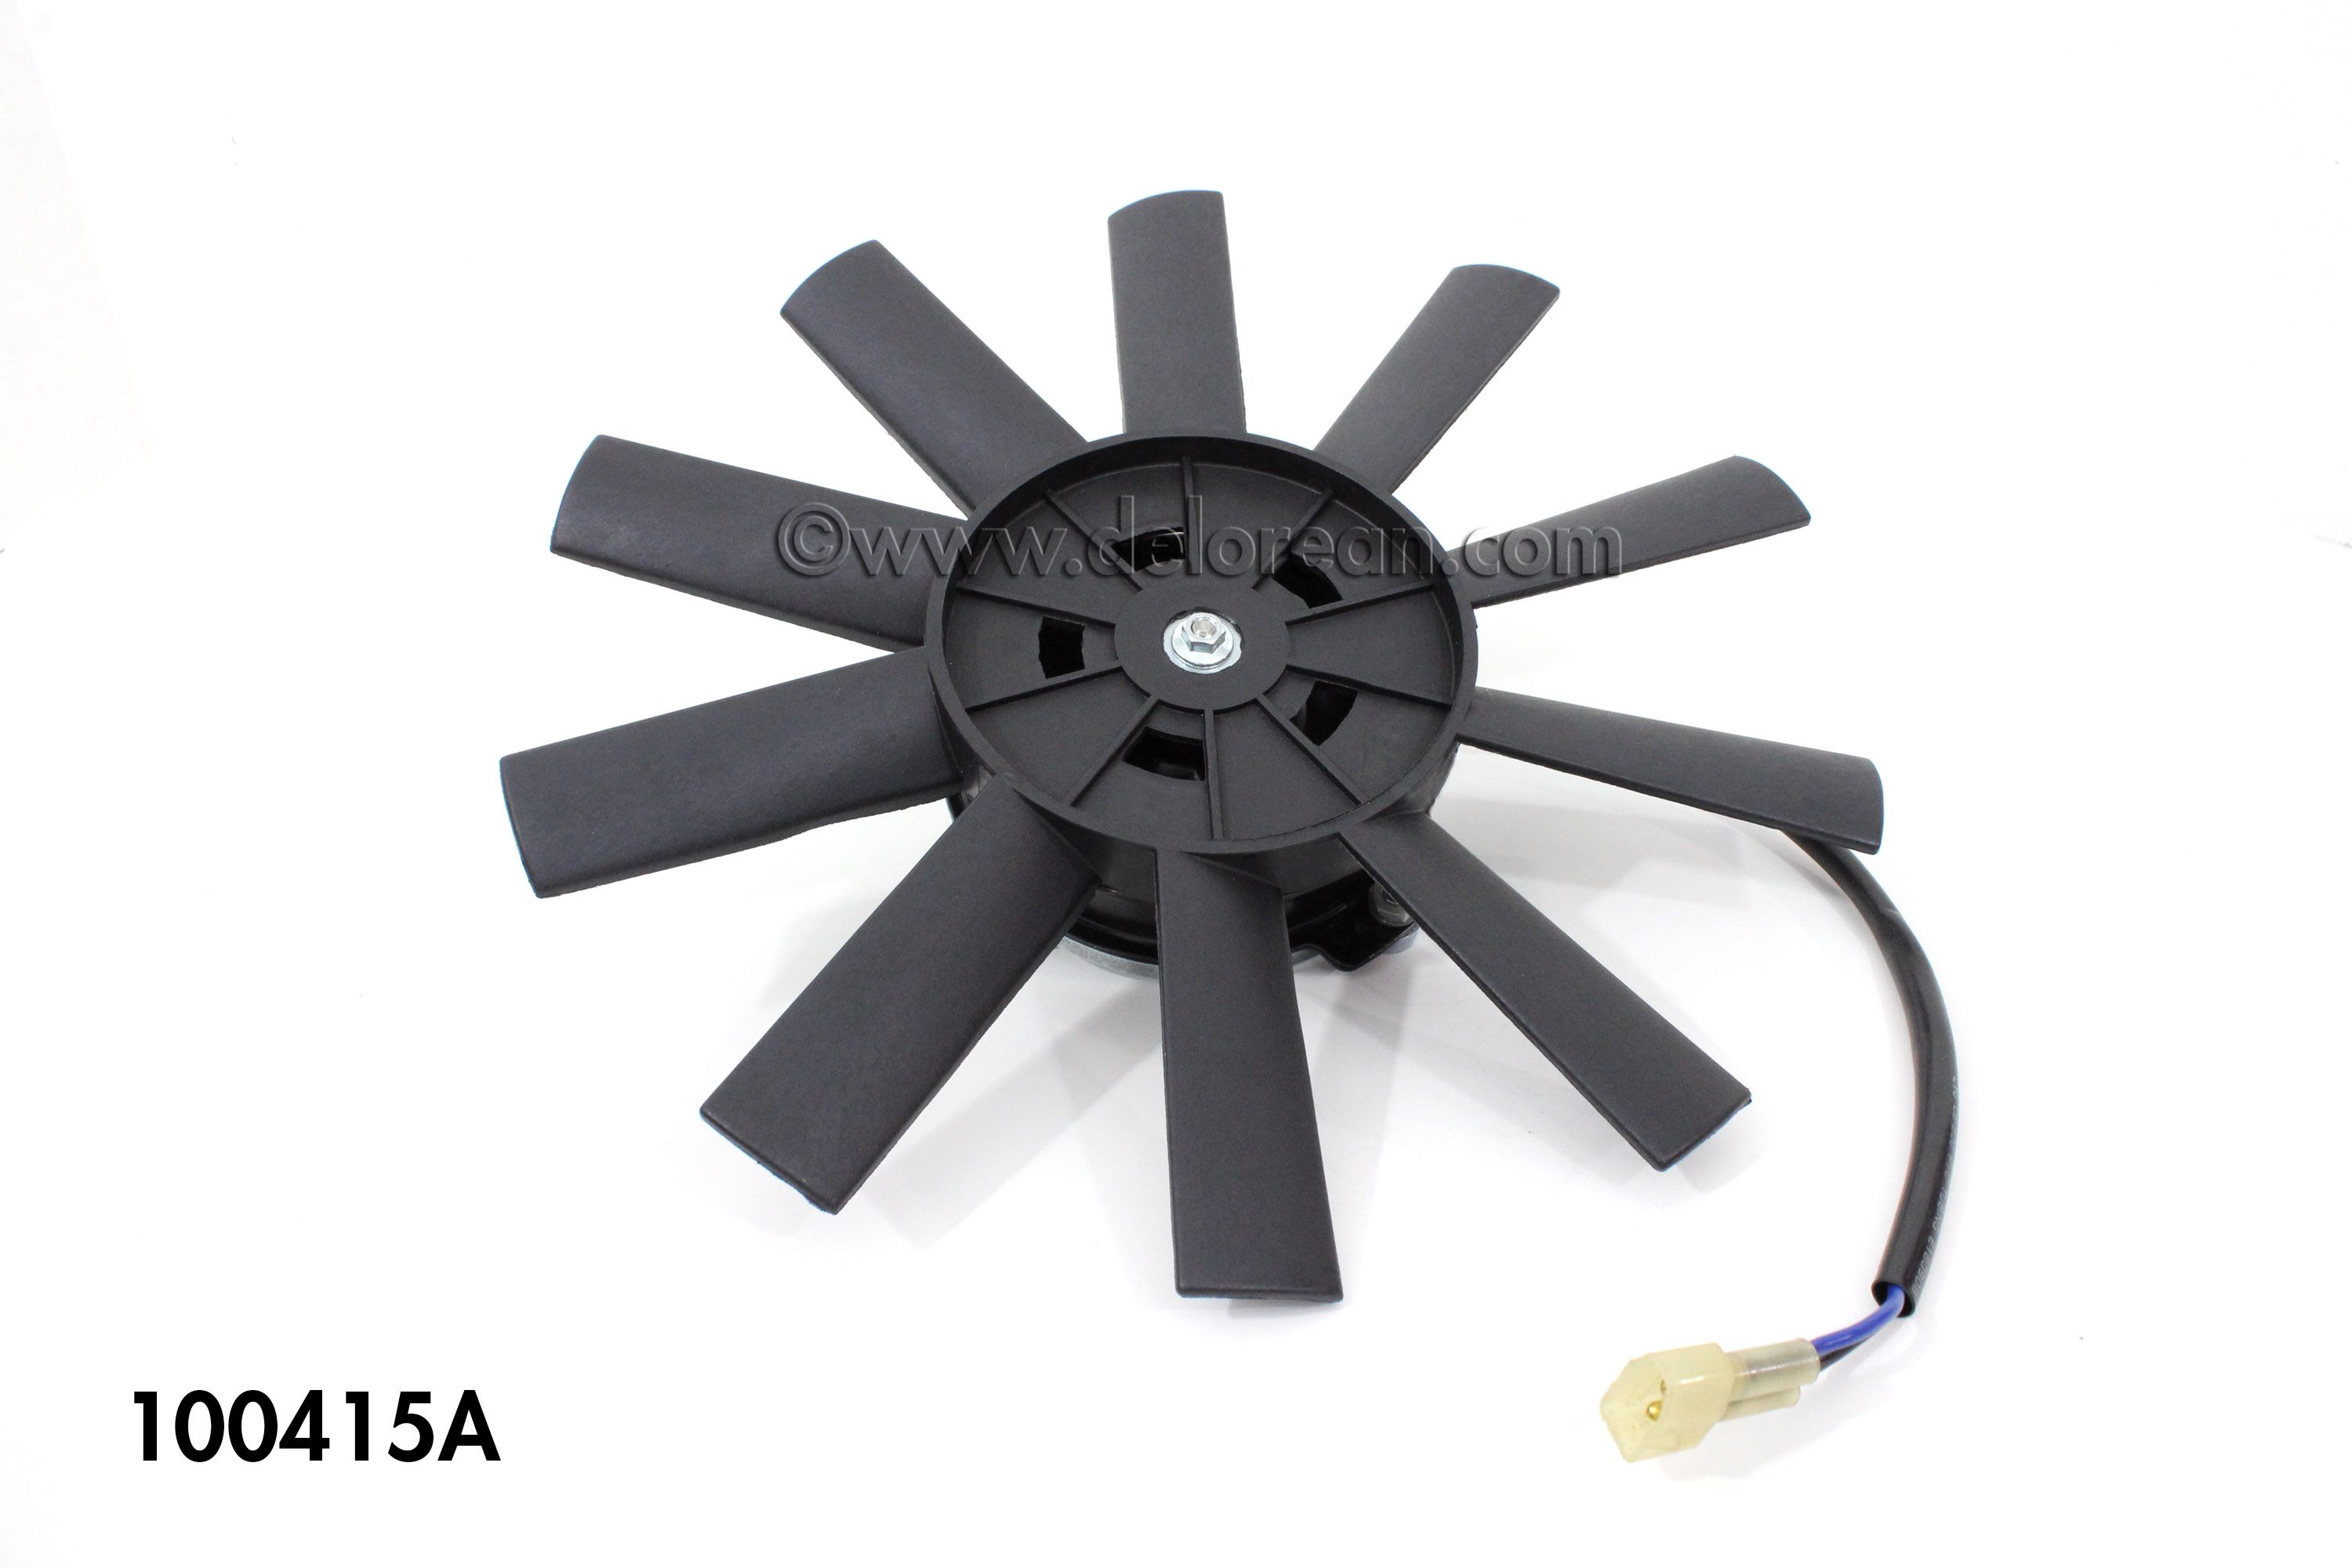 retail Morbidity hat Radiator Cooling Fan & Motor (Improved) | Official DeLorean Motor Company®  | New, Original, and Reproduction Parts